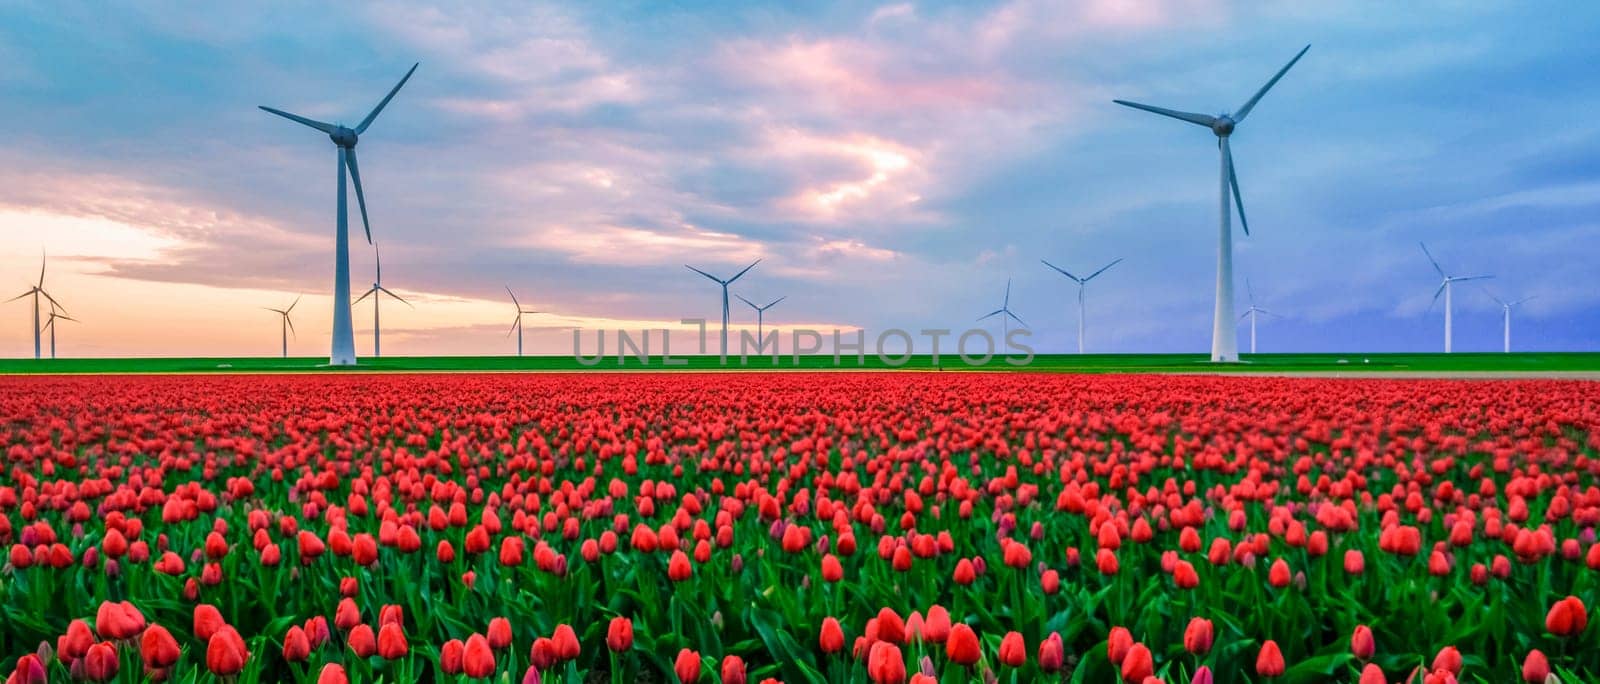 Windmill turbines with a blue sky and colorful tulip fields in Flevoland Netherlands by fokkebok